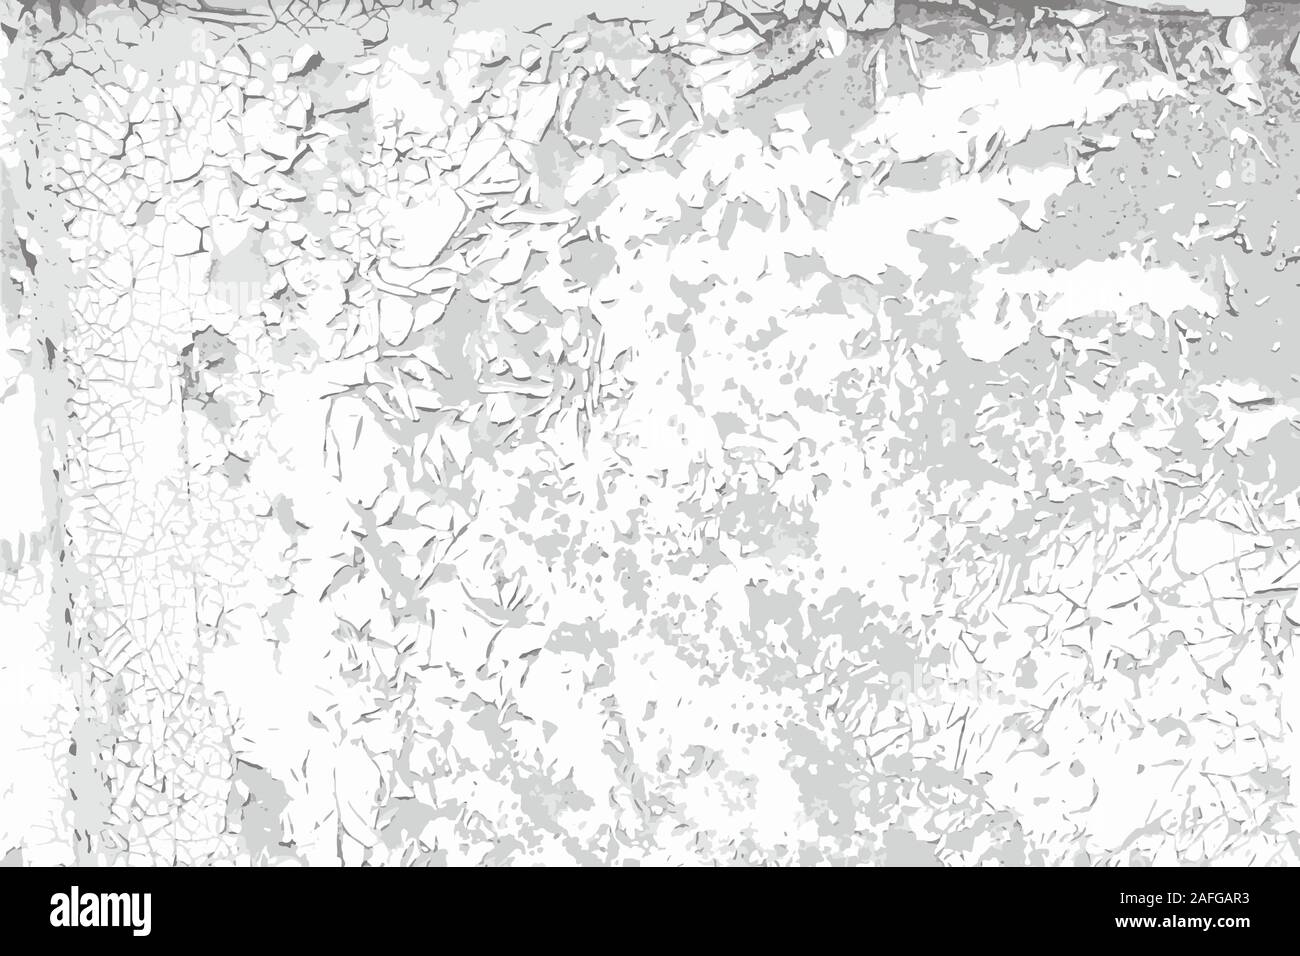 Weathered cracked paint vector black and white texture background. Grunge scratch wall template for overlay artwork. Stock Vector